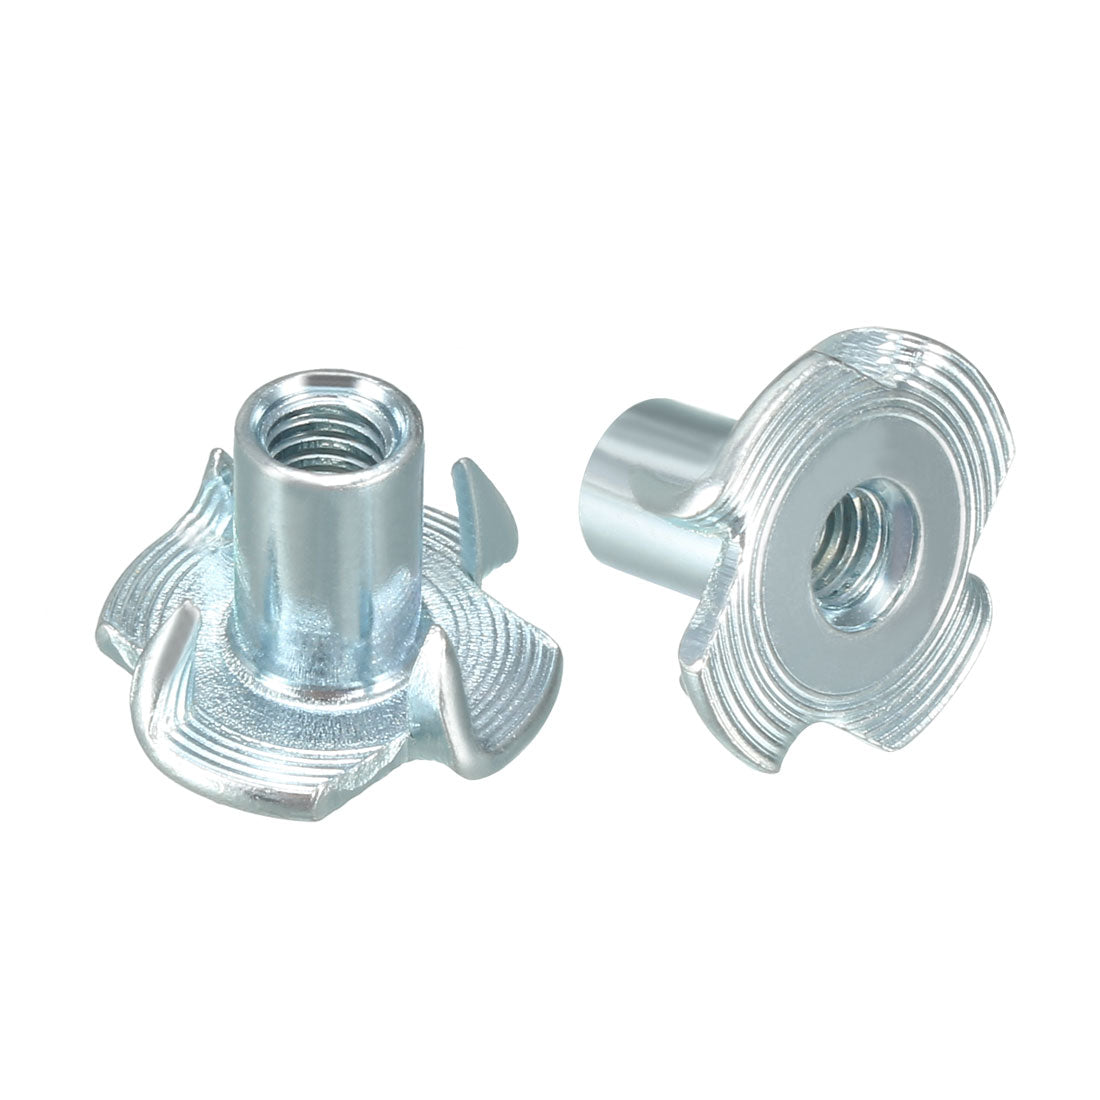 uxcell Uxcell 4 Pronged Tee Nut T-Nuts